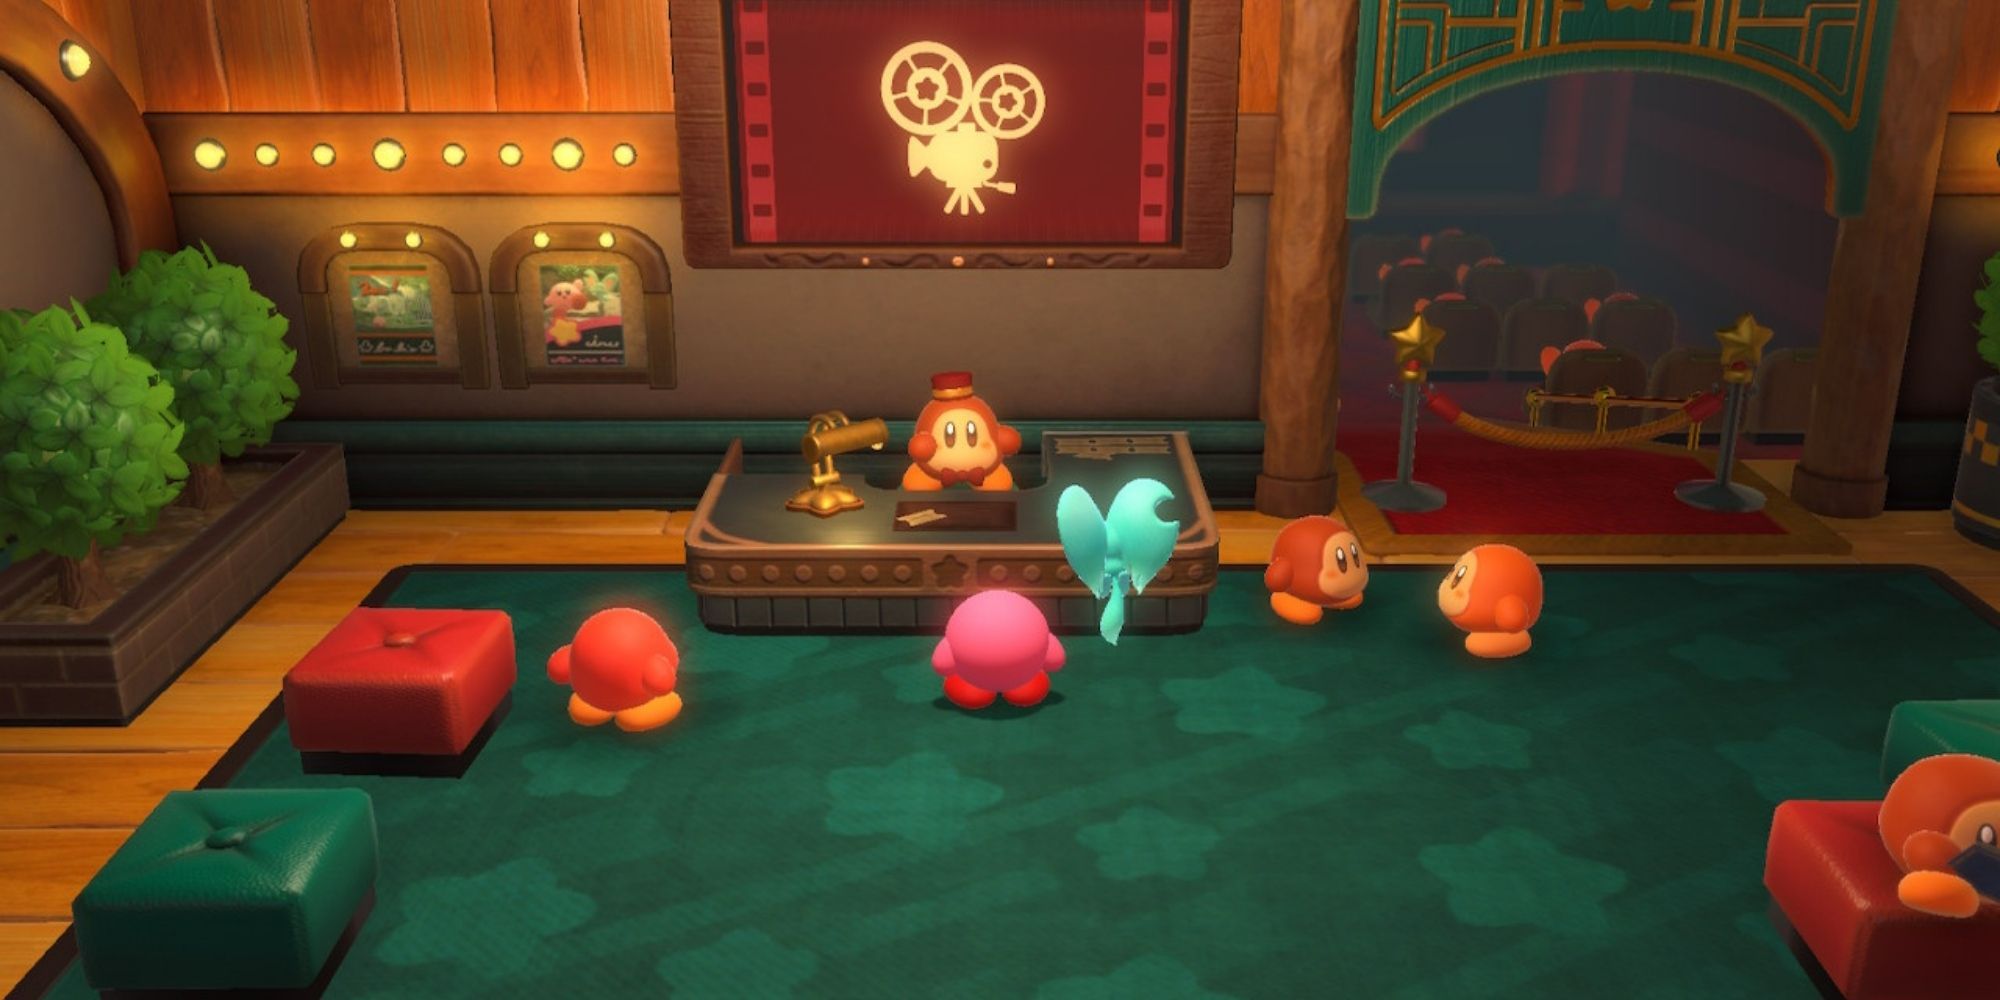 Kirby and the Forgotten Land Waddle Dee Cinema Kirby and Elfilin Stand By The Desk In The Cinema